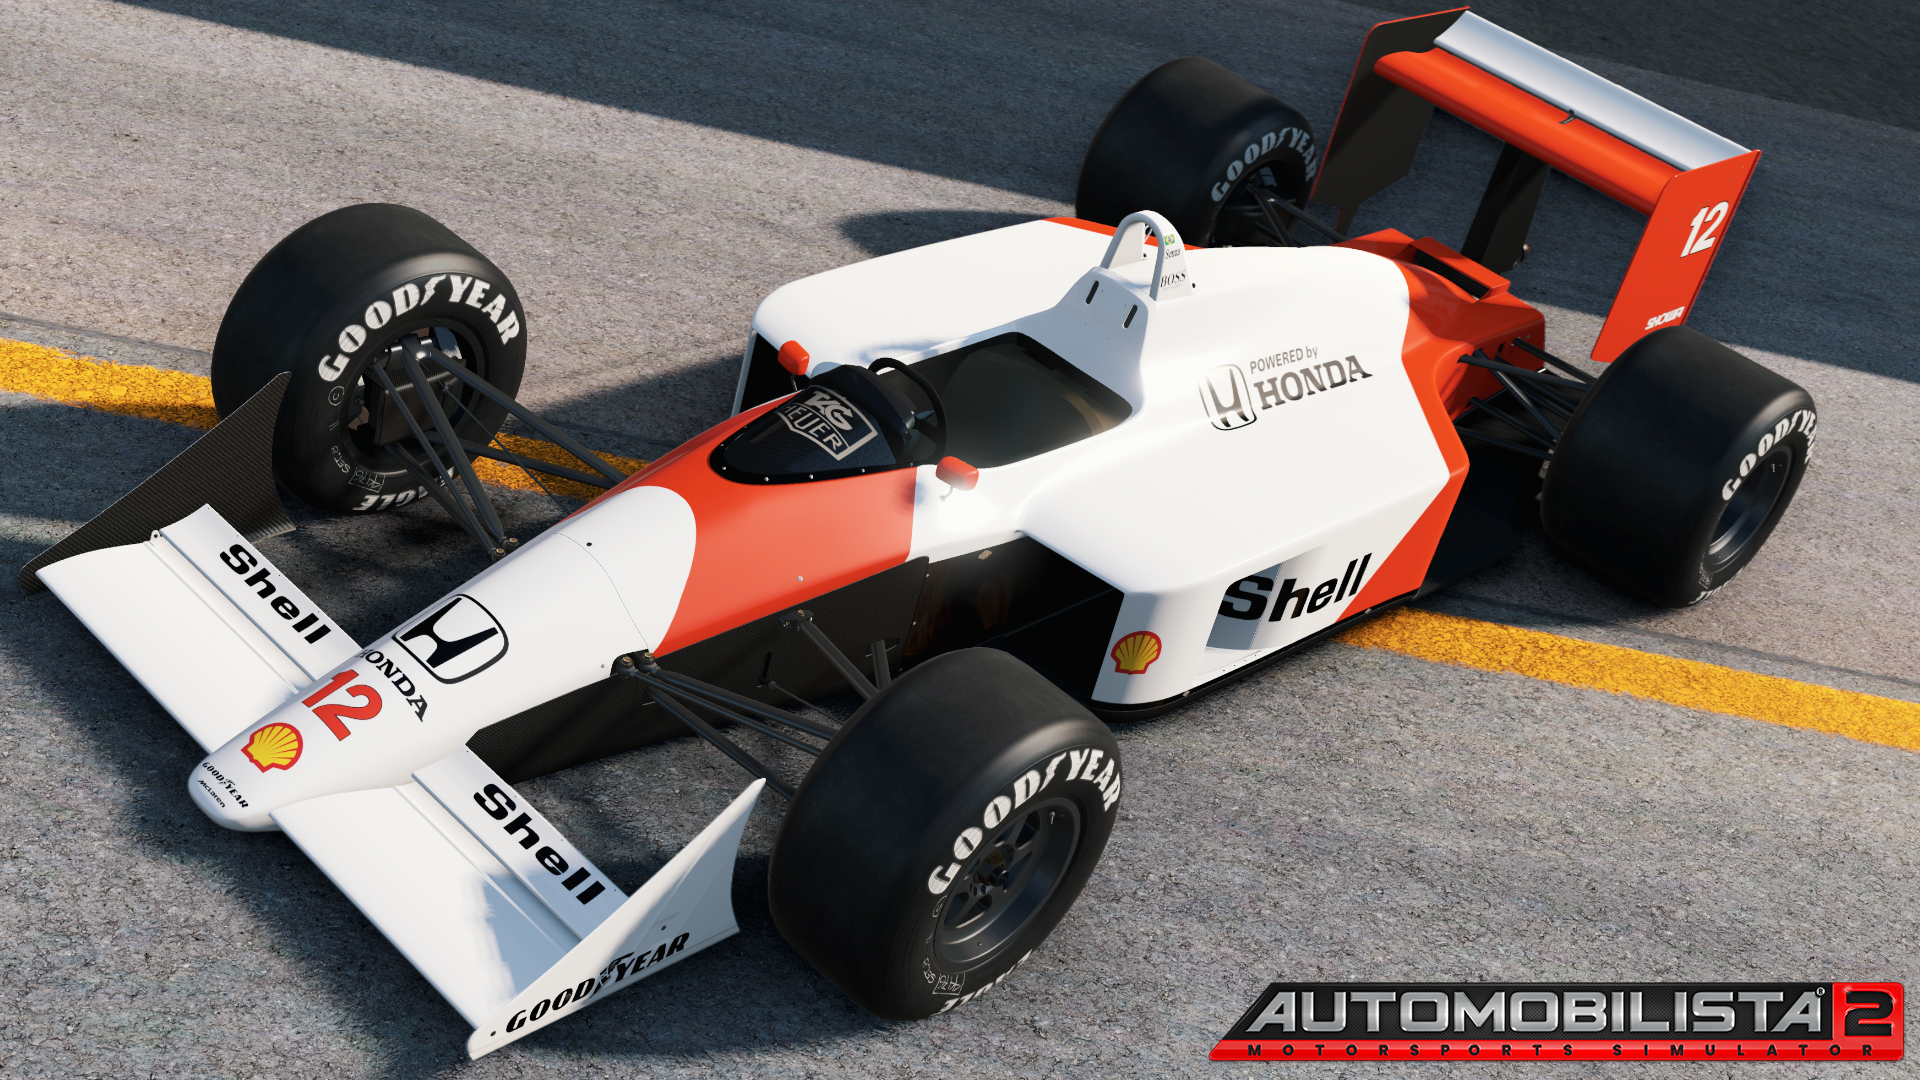 Automobilista 2 has lots of F1 content both old and new.jpg